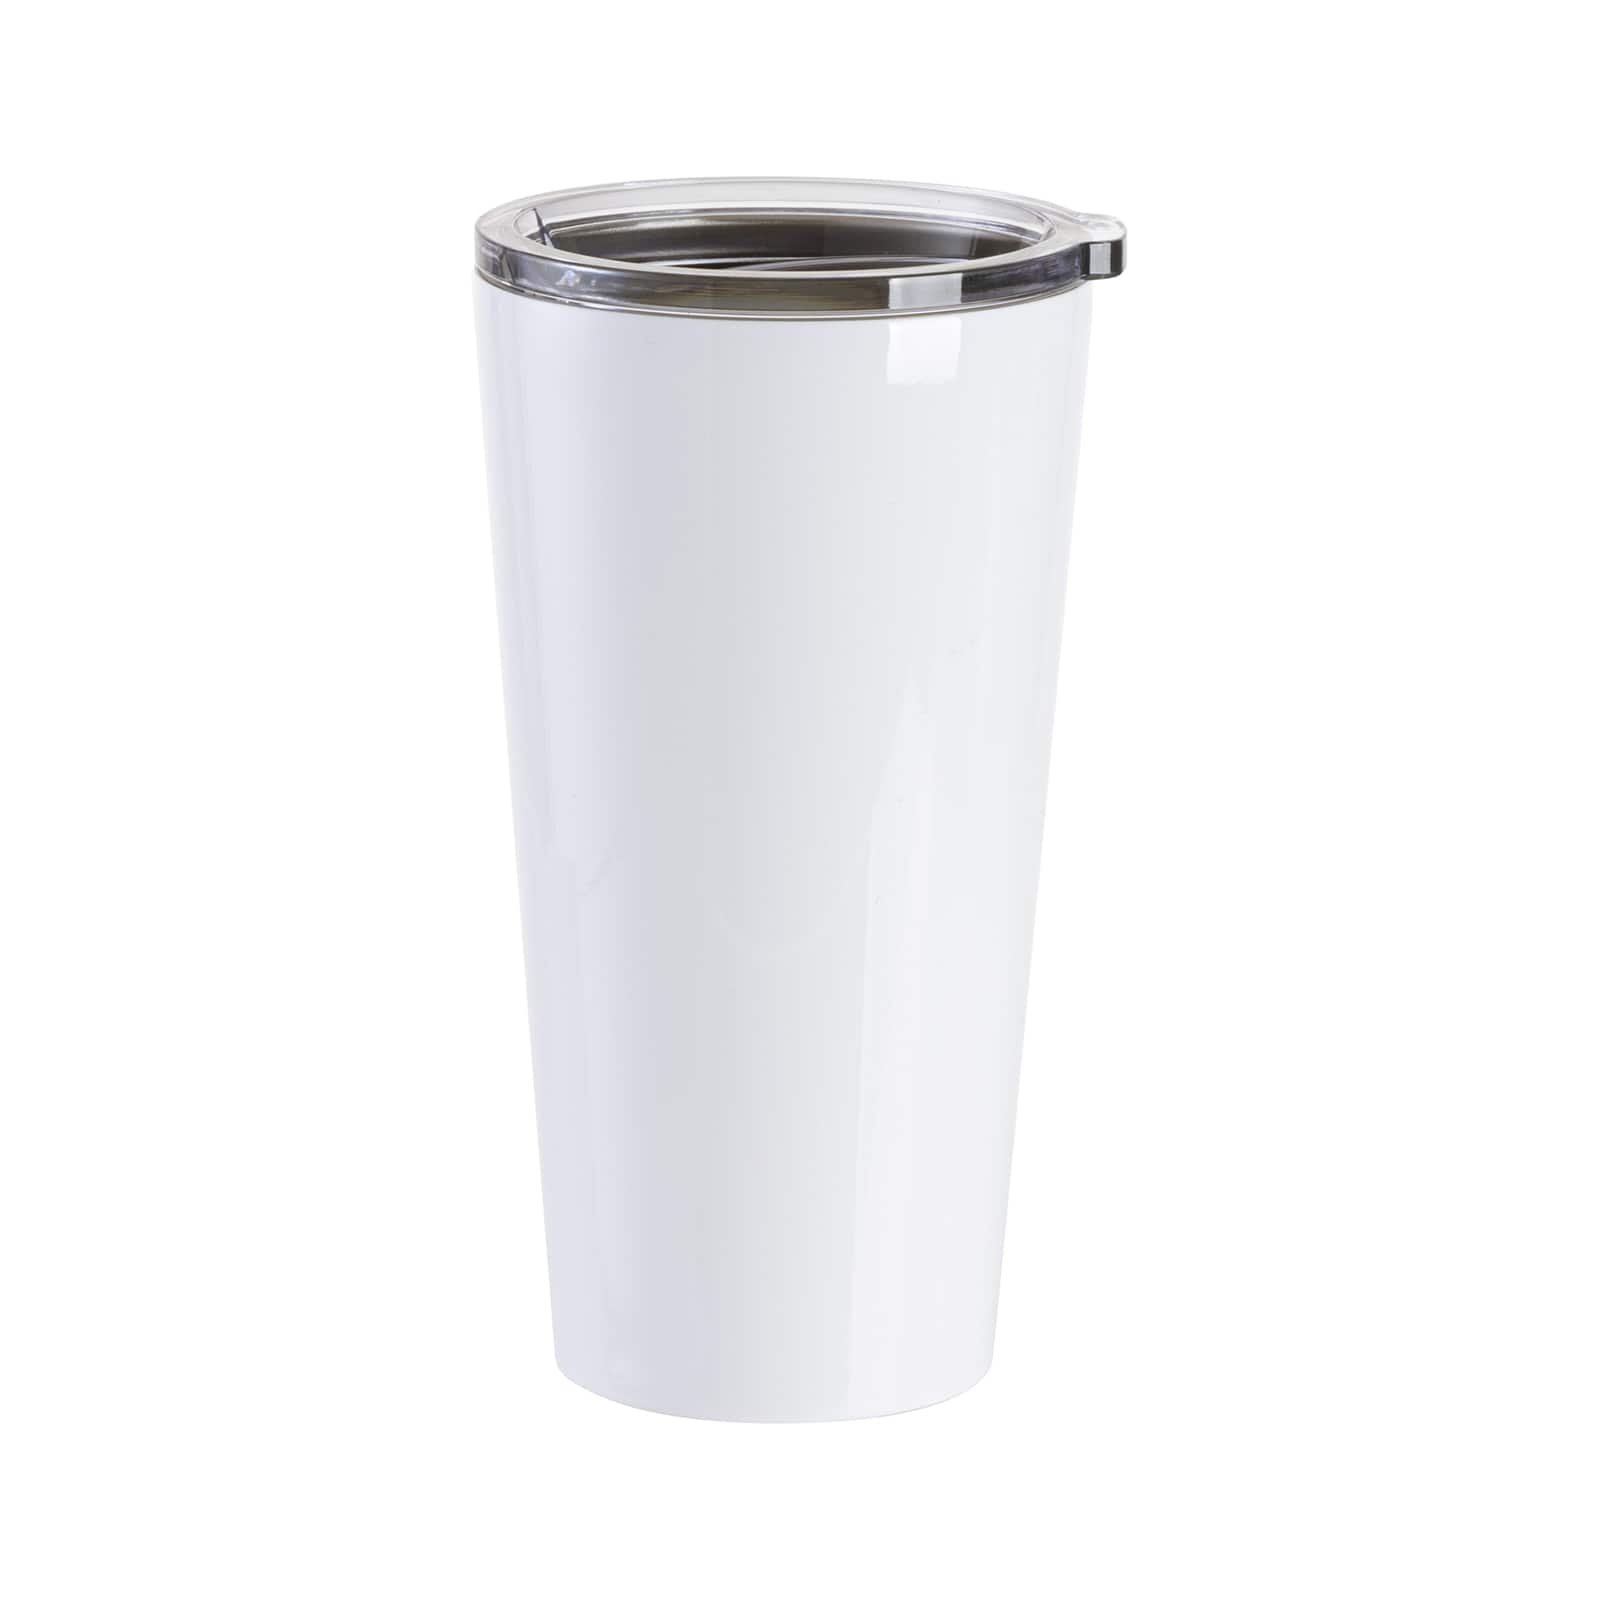 R and R Imports The University of Texas at Tyler 16 oz Insulated Stainless Steel Tumbler Colorless